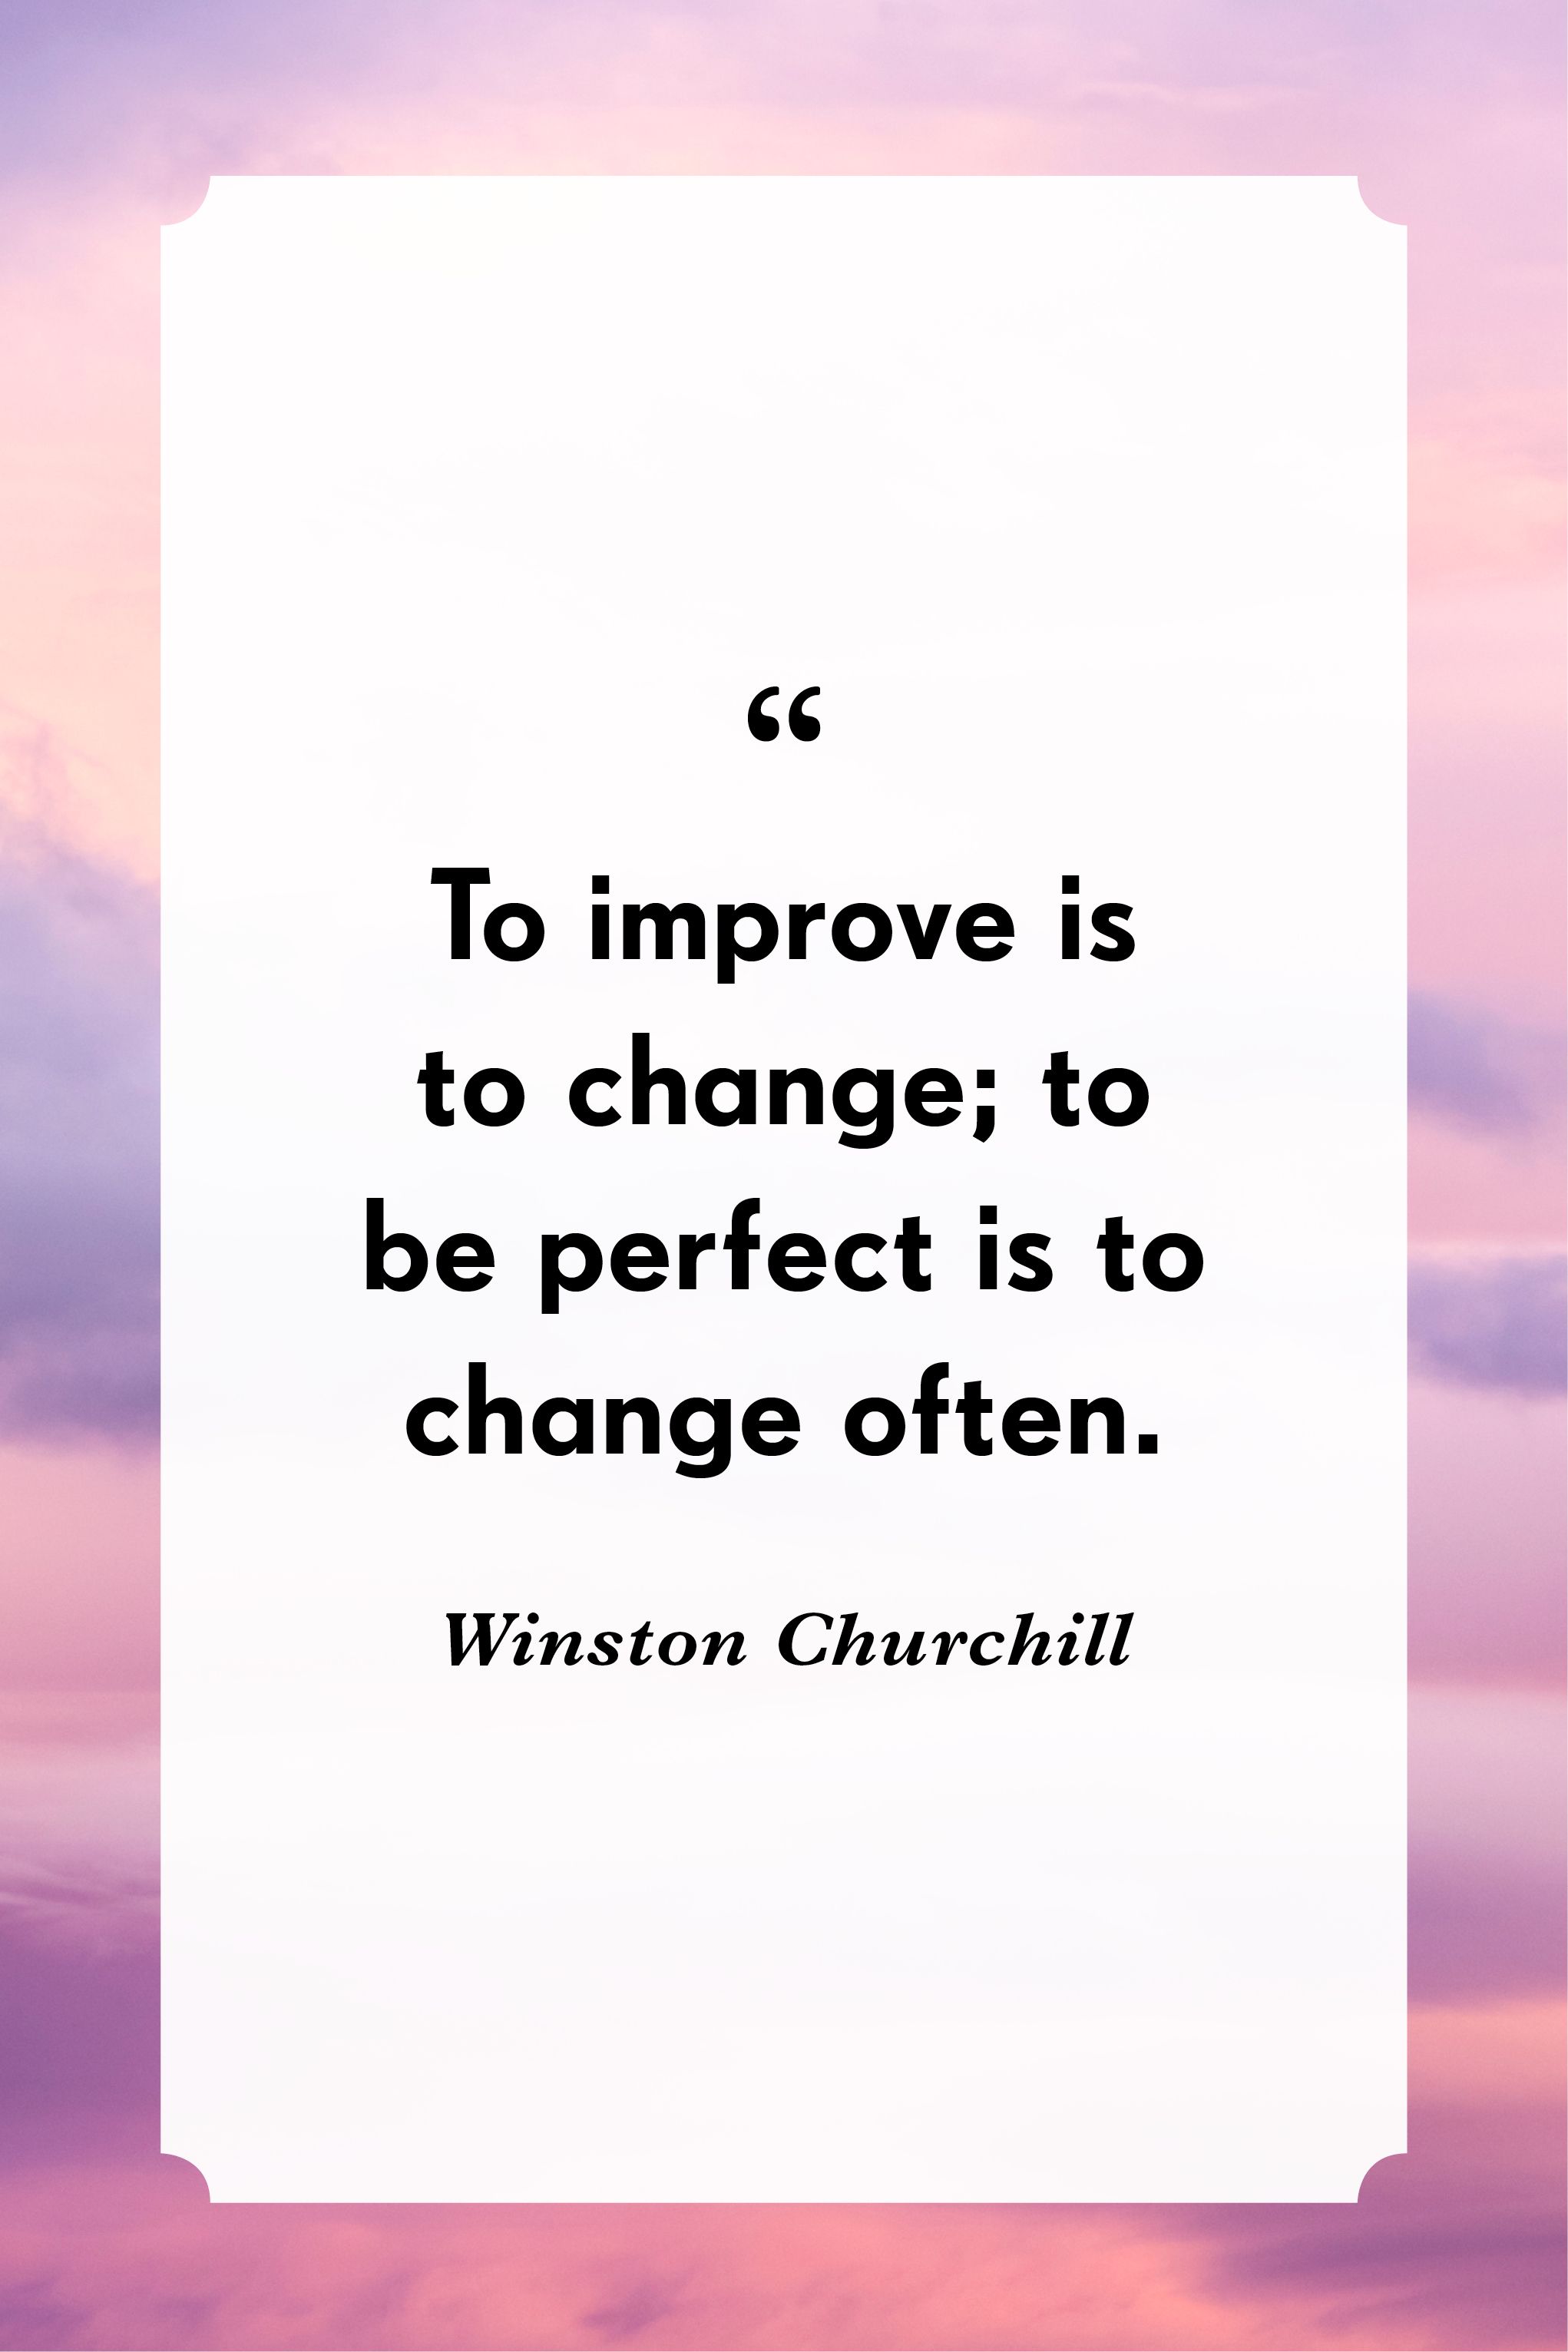 44 Inspirational Quotes About Change That Will Help You Think